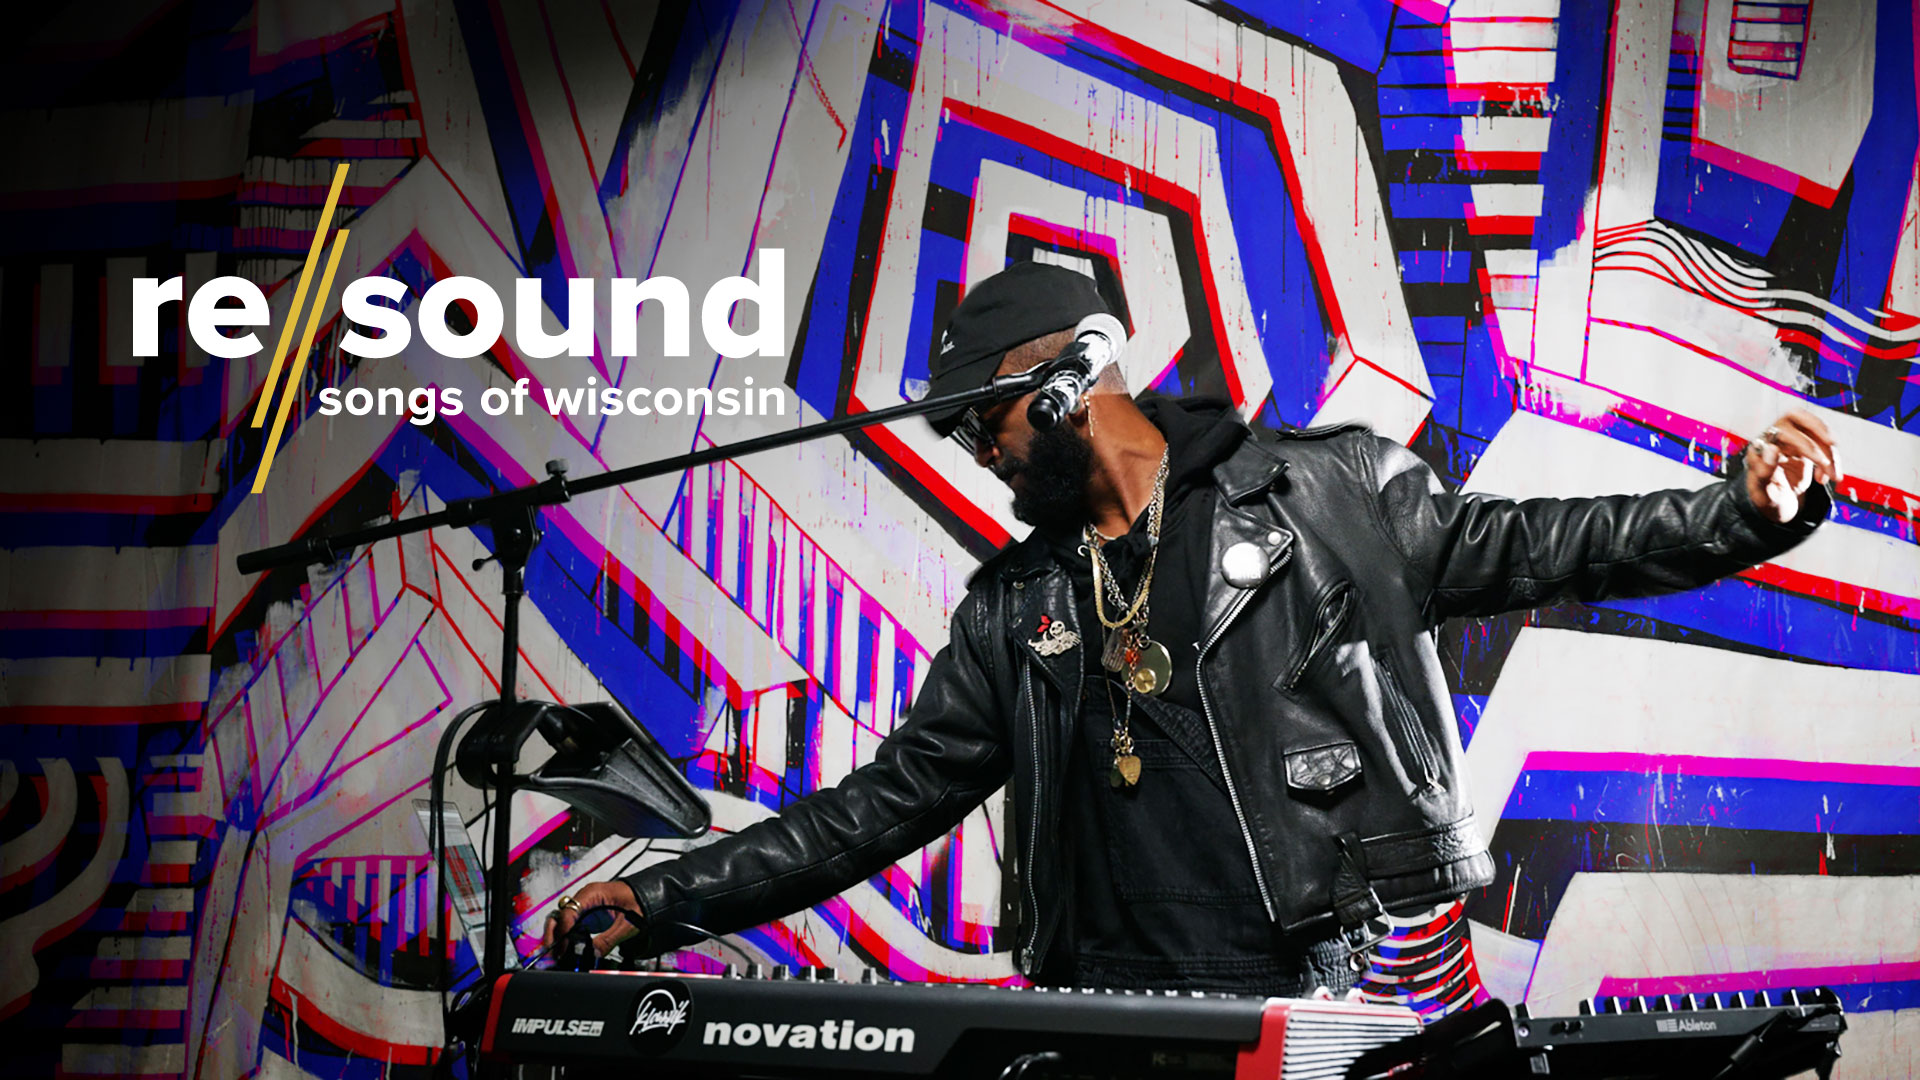 Photo of a DJ spinning music as part of the ReSound project.